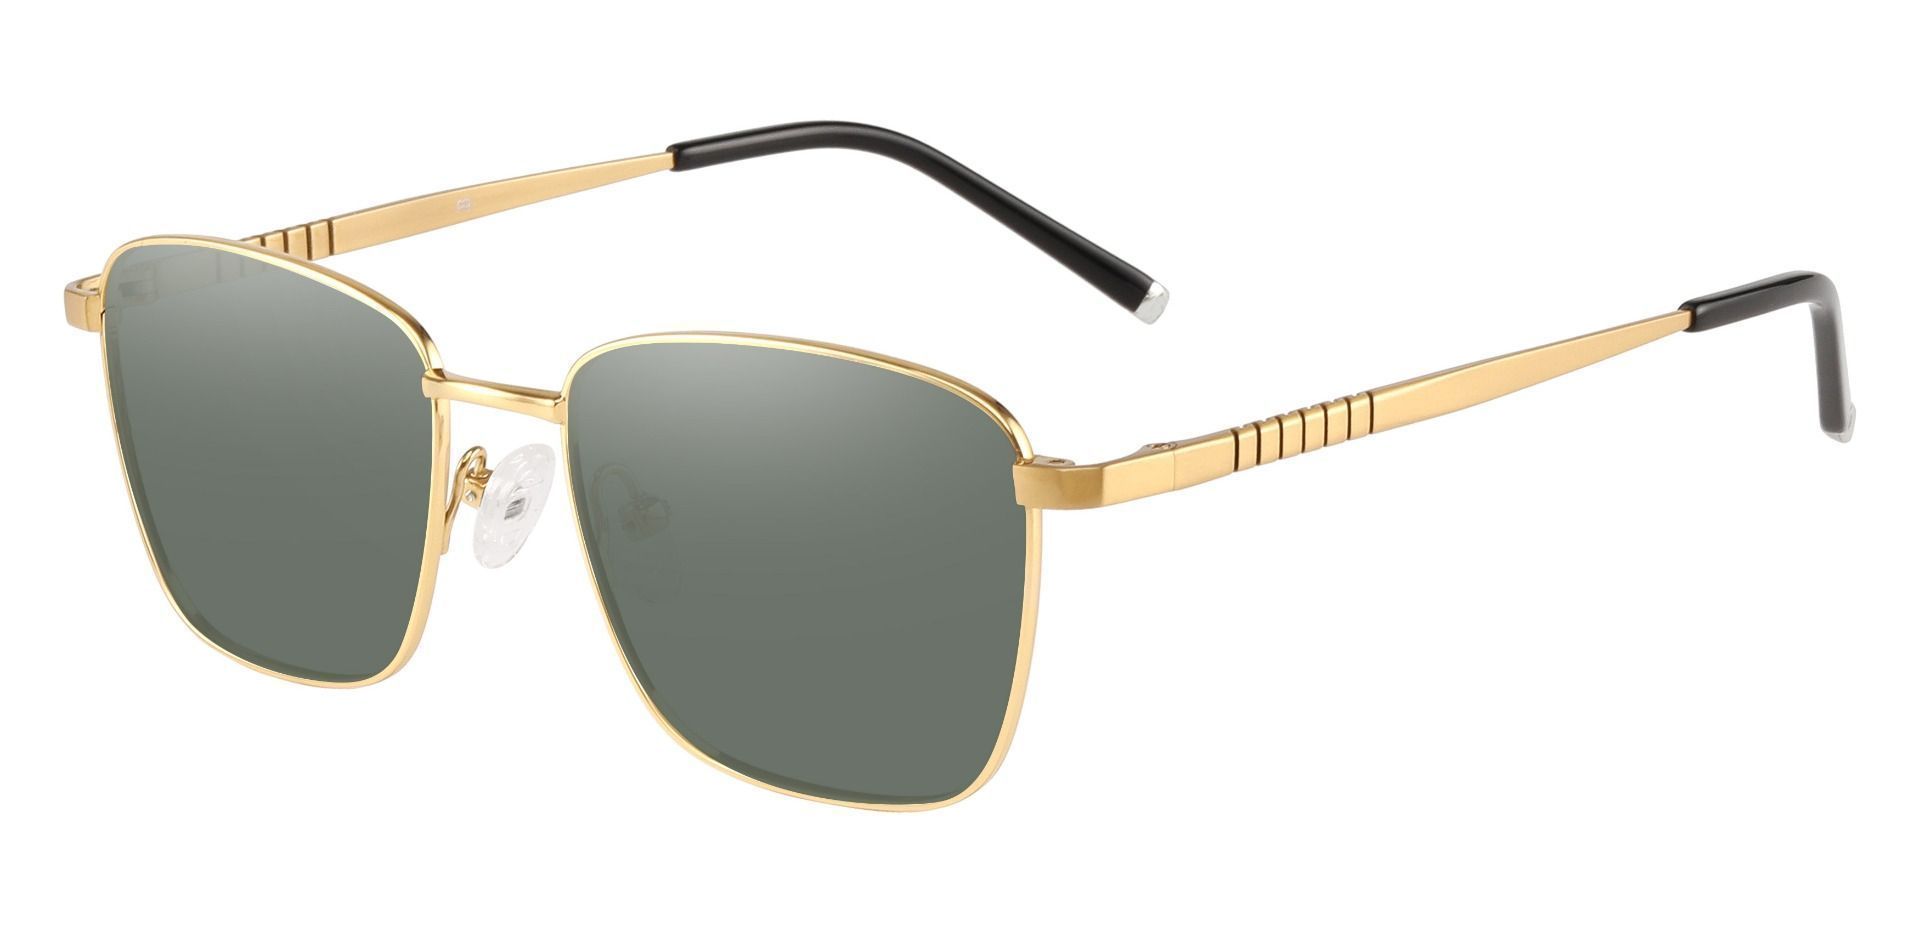 May Square Progressive Sunglasses - Gold Frame With Green Lenses